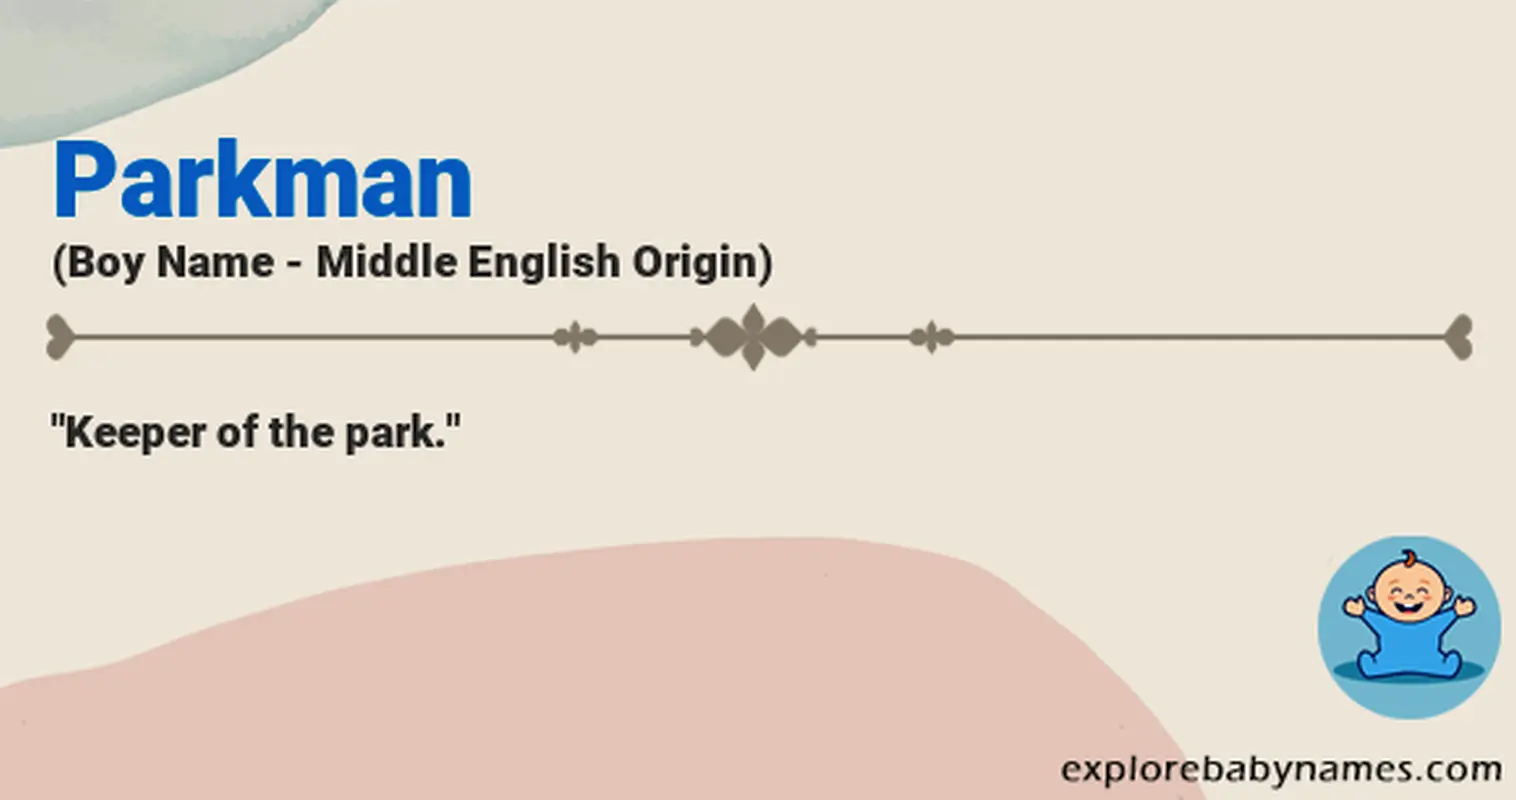 Meaning of Parkman